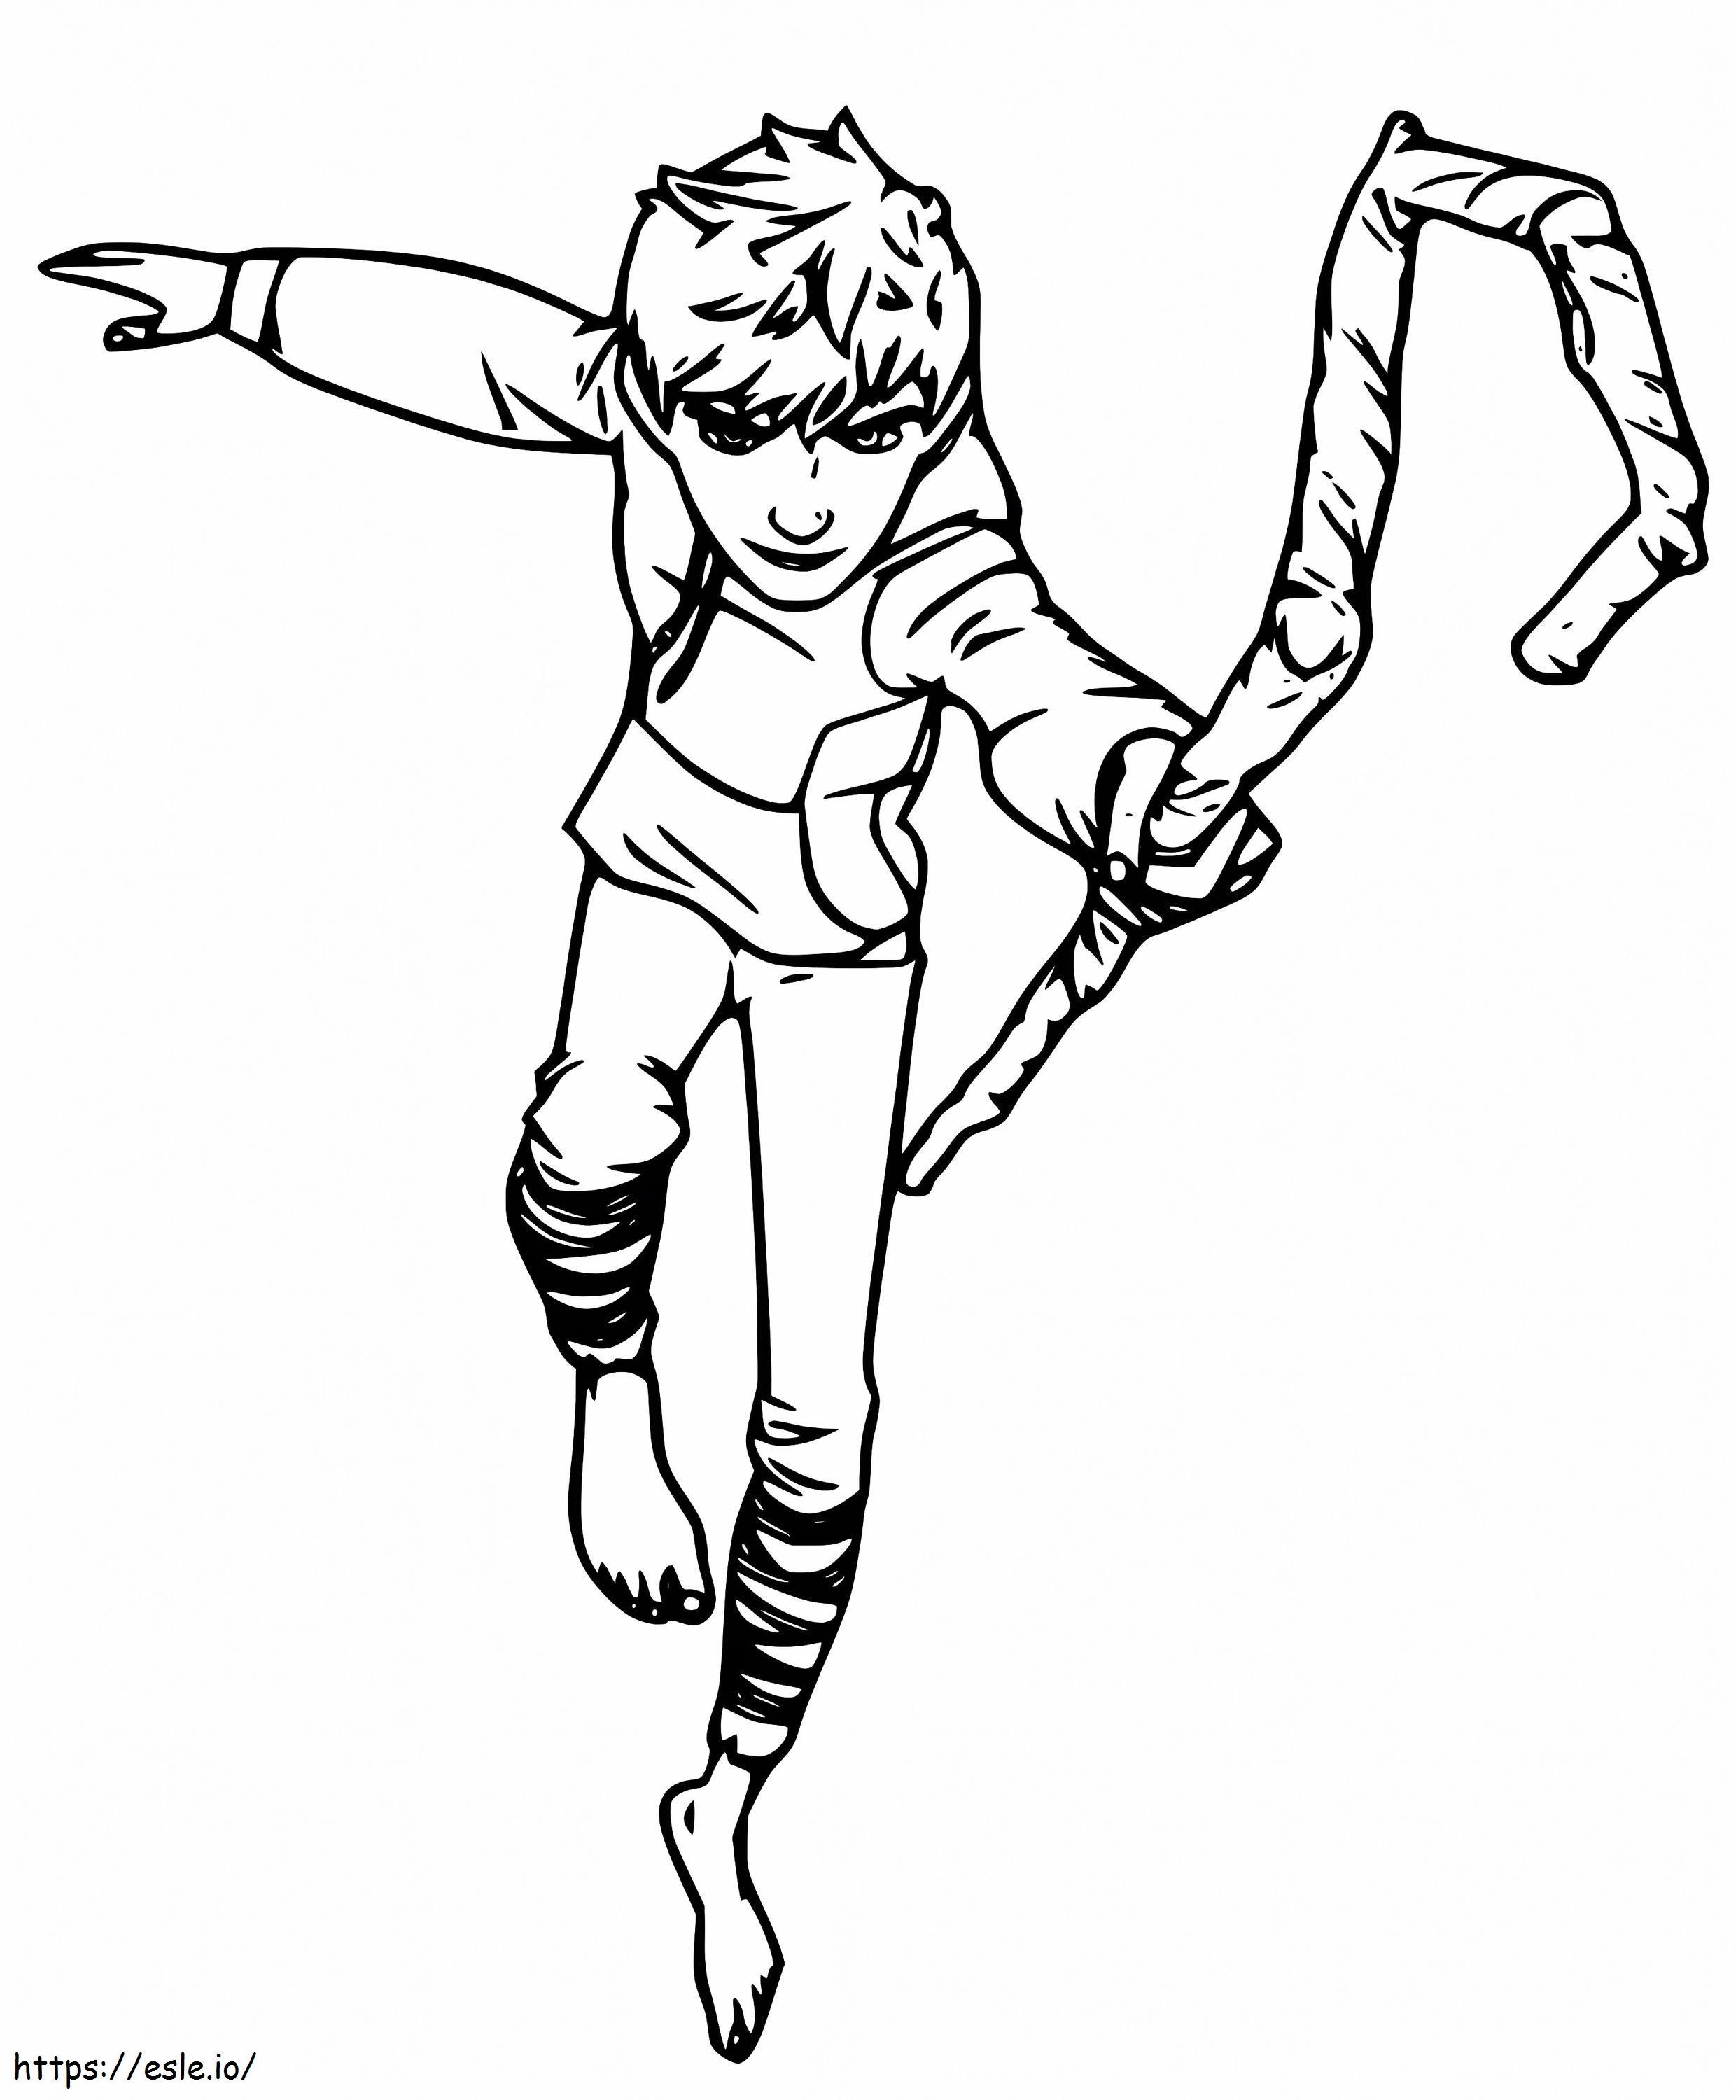 Jack Frost From Rise Of The Guardians coloring page